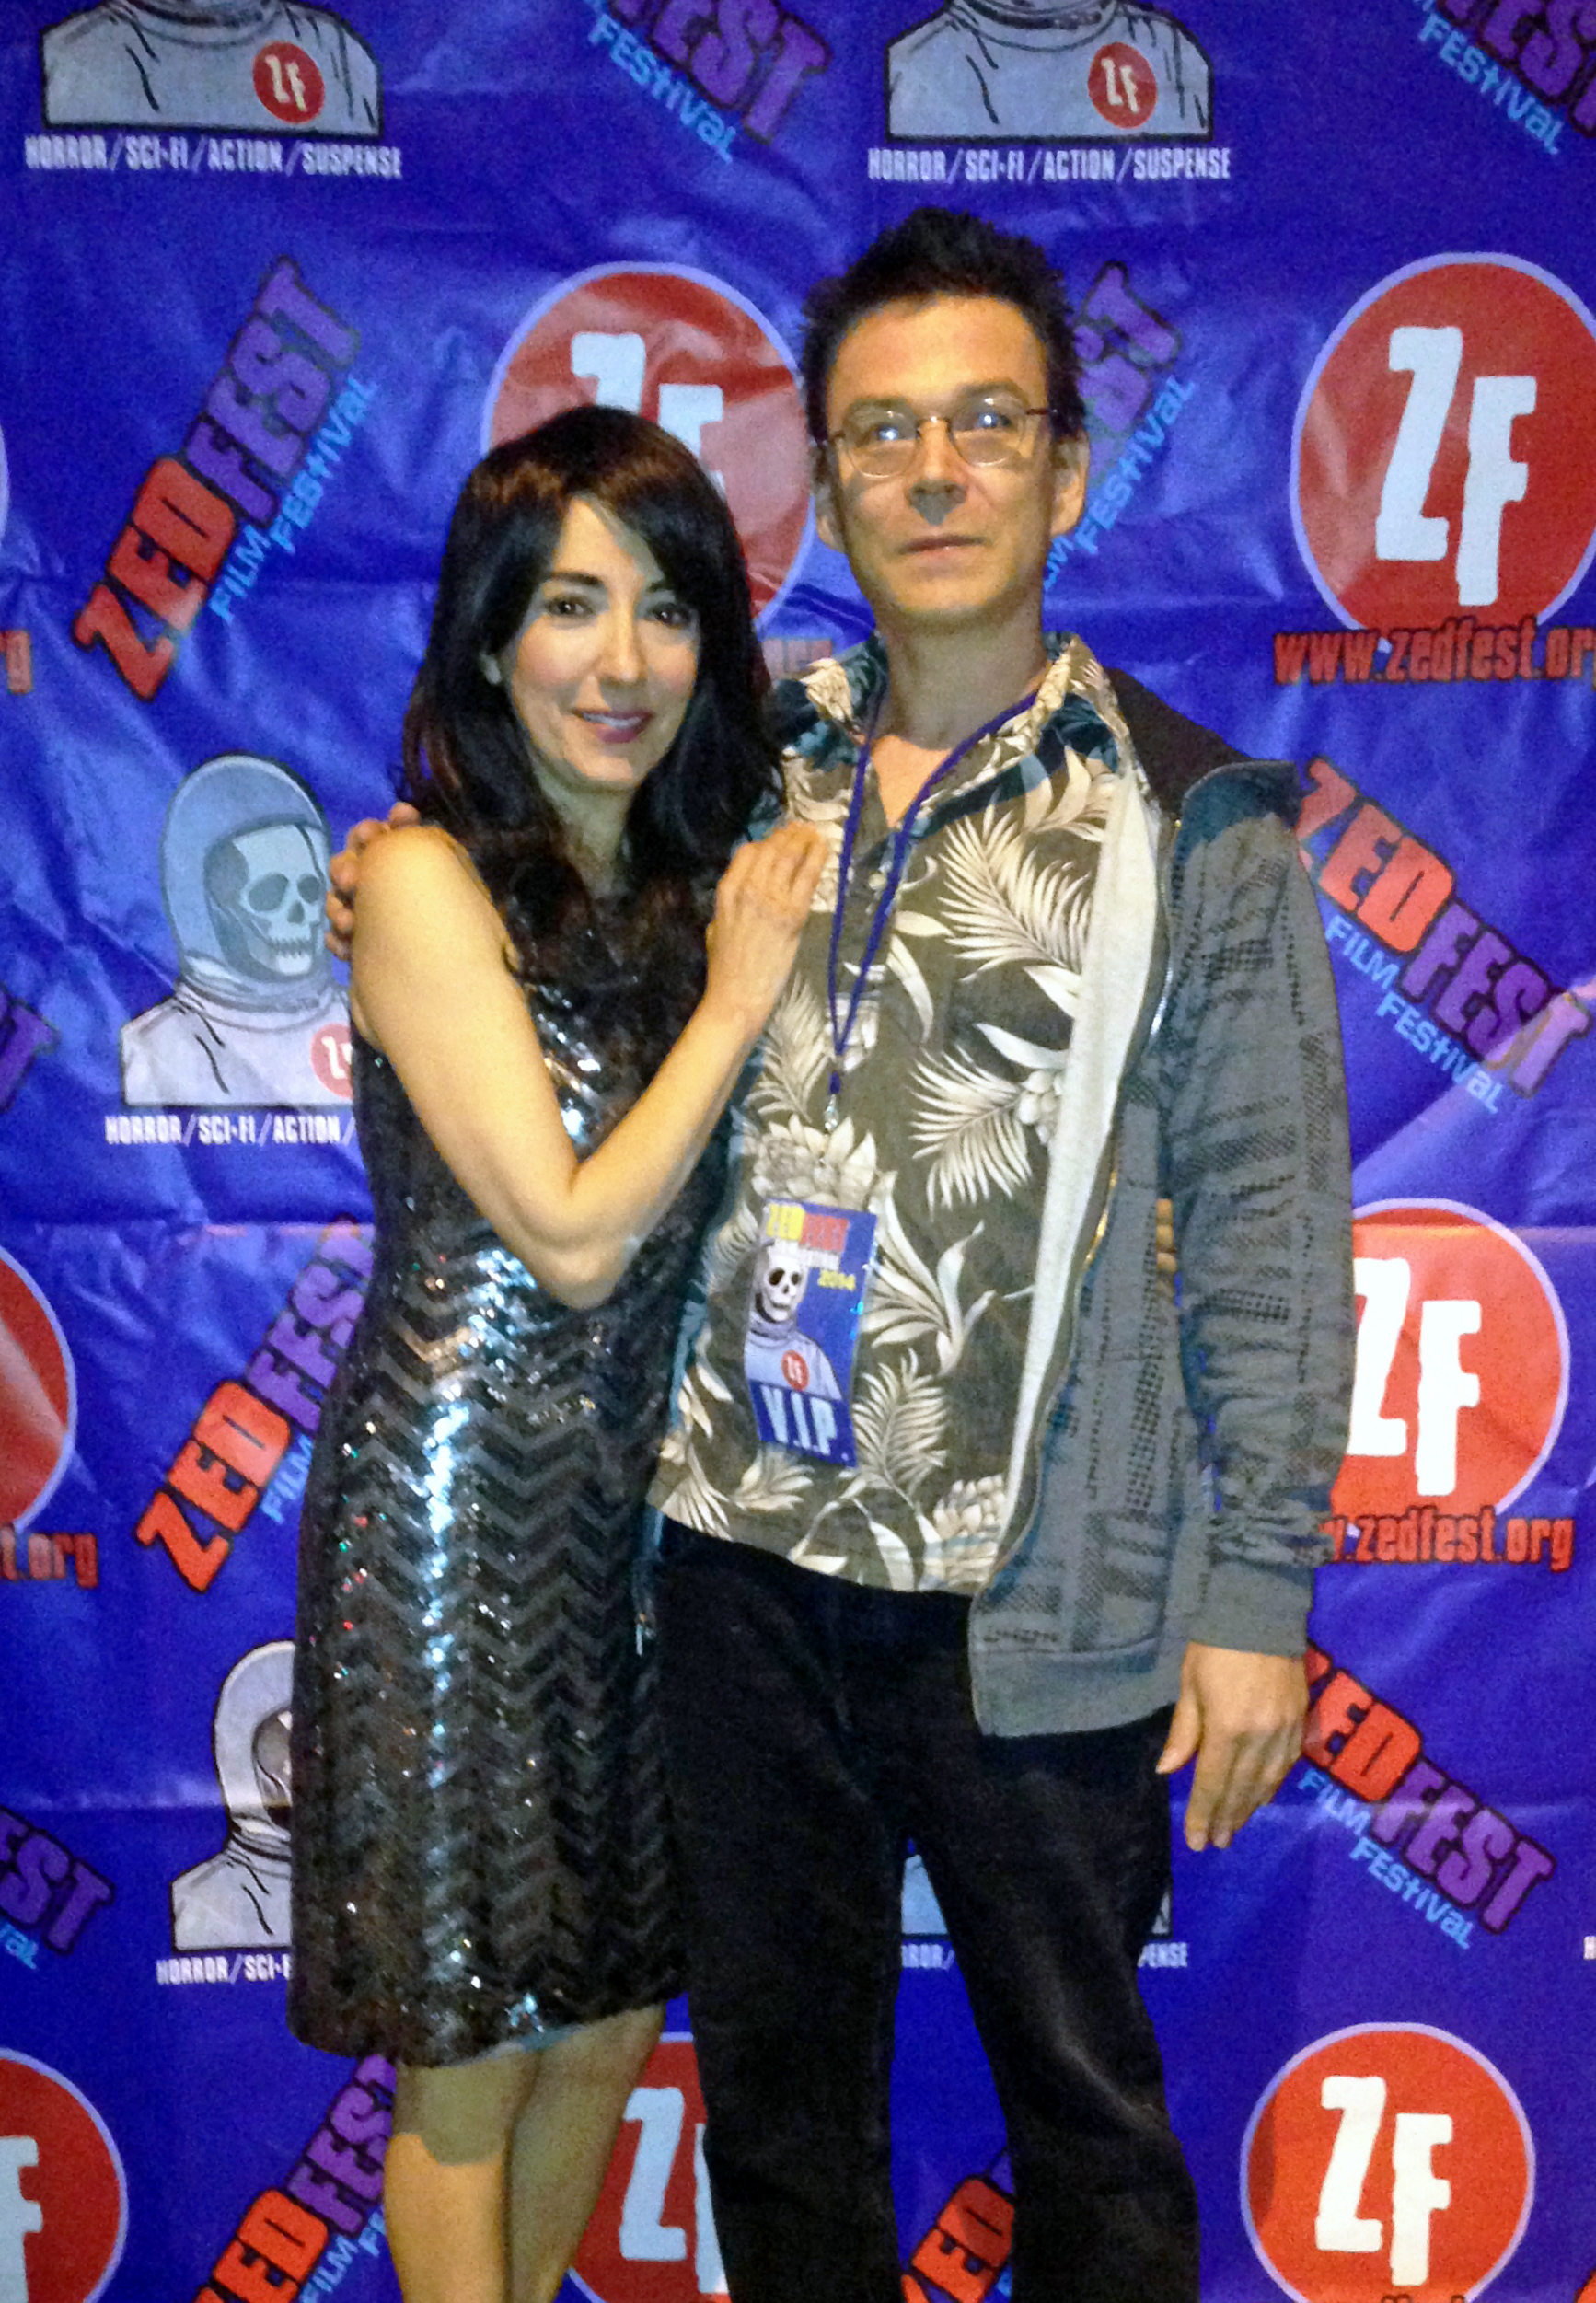 Luciana Lagana and star/producer Edward Parker Bolman at the premiere of the multiple award-winning feature film Omadox at Zed Fest Film Festival in Burbank, CA on 12/14/14.